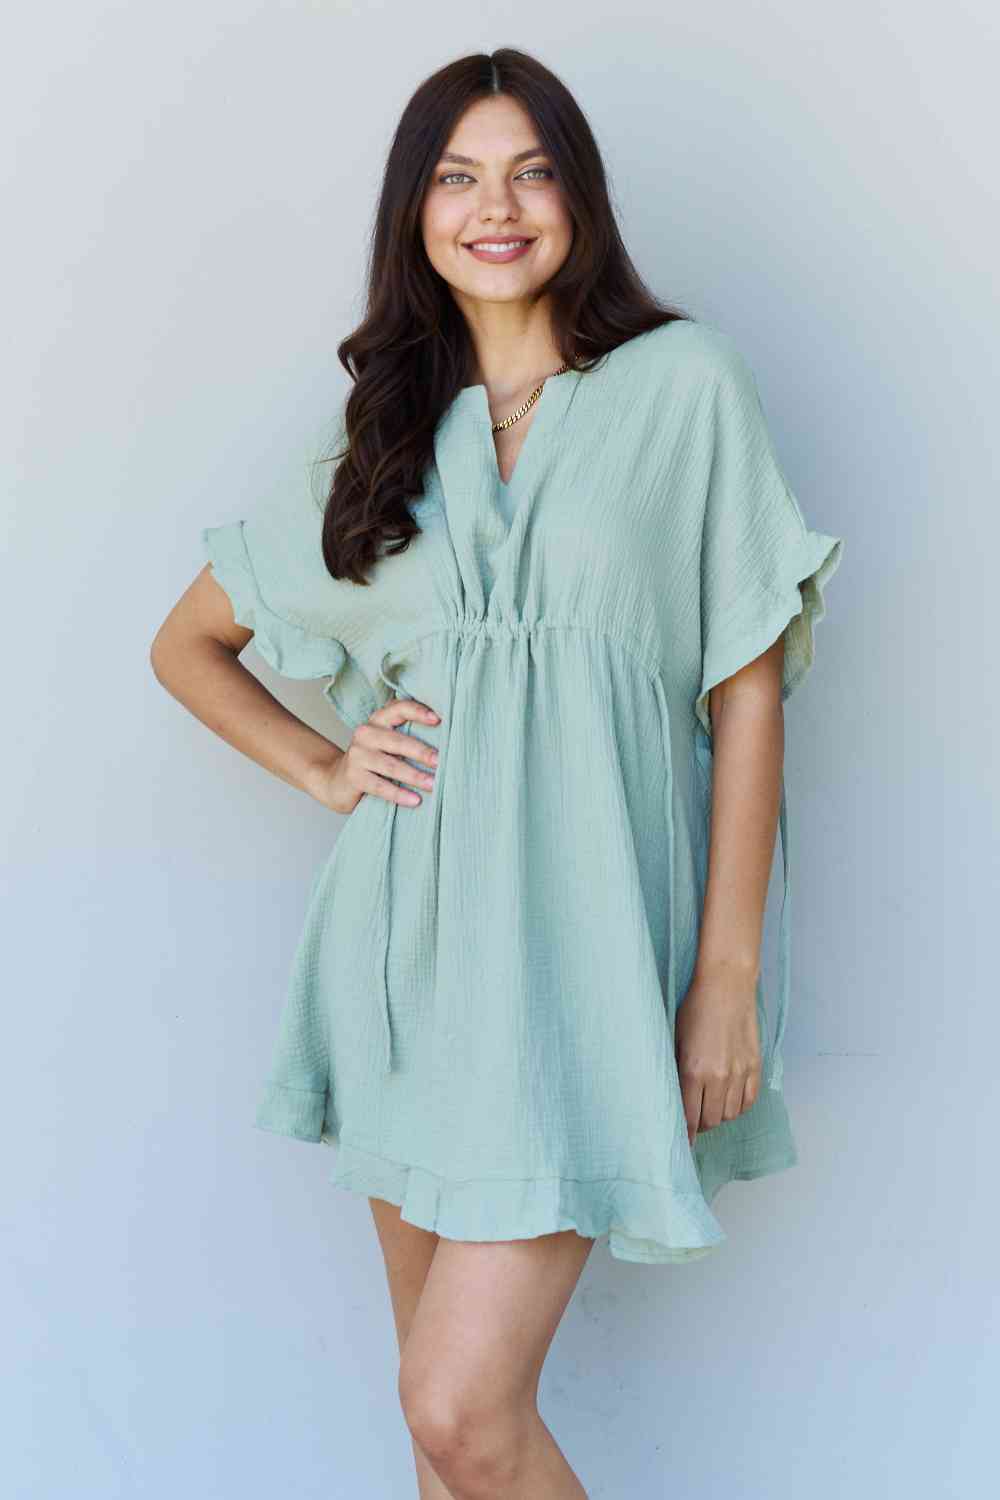 Ninexis Out Of Time Full Size Ruffle Hem Dress with Drawstring Waistband in Light Sage No 6